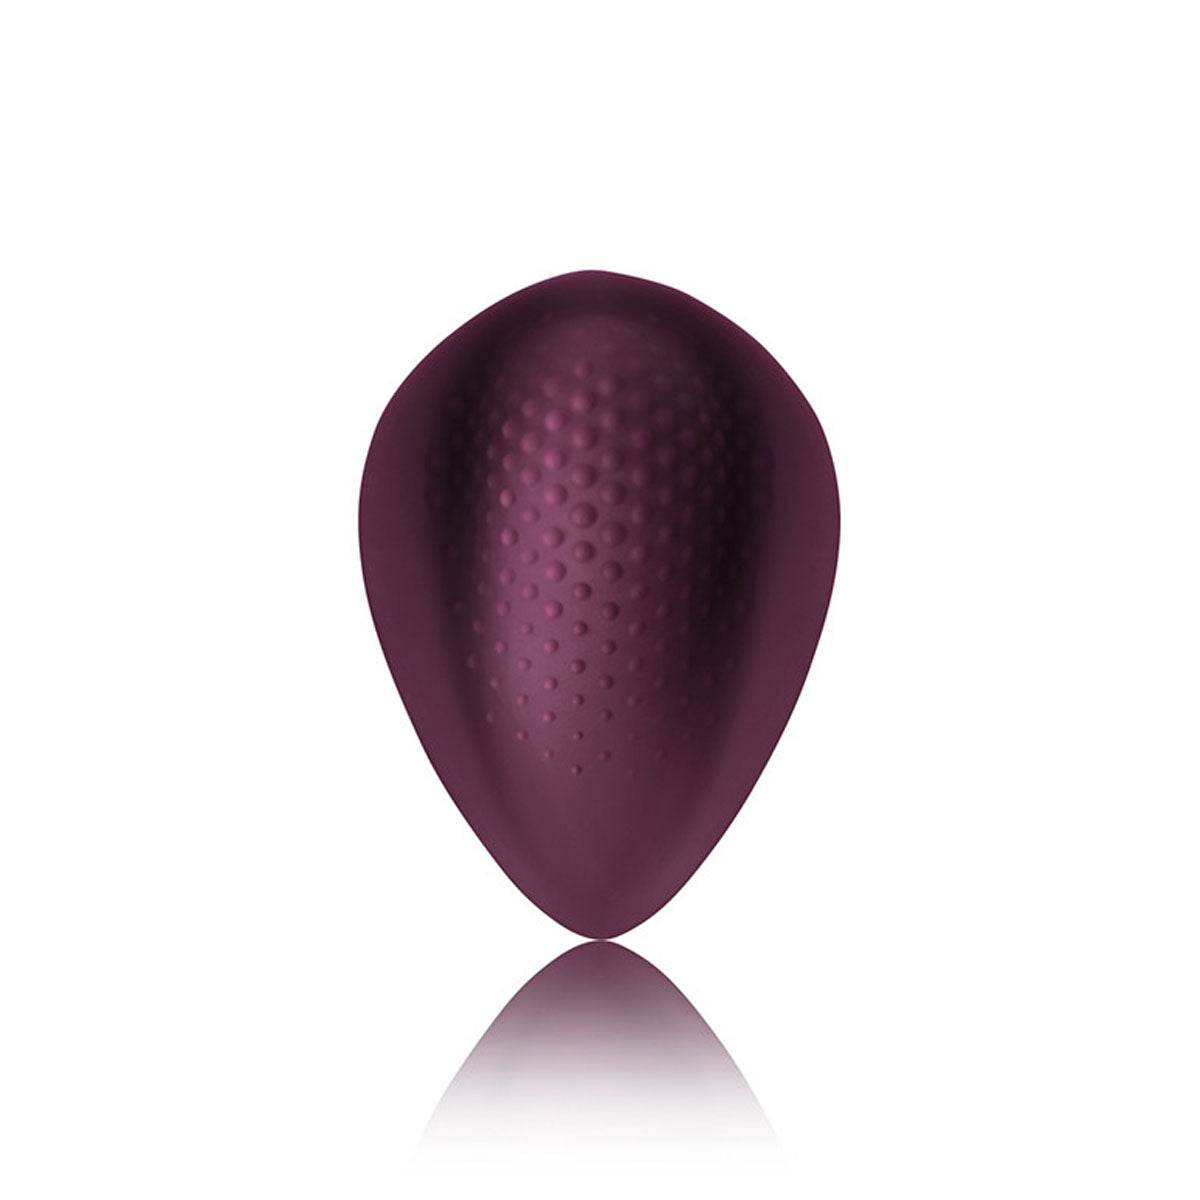 Burgundy silicone almond-shaped vibrator with bumpy texture  Nudie Co